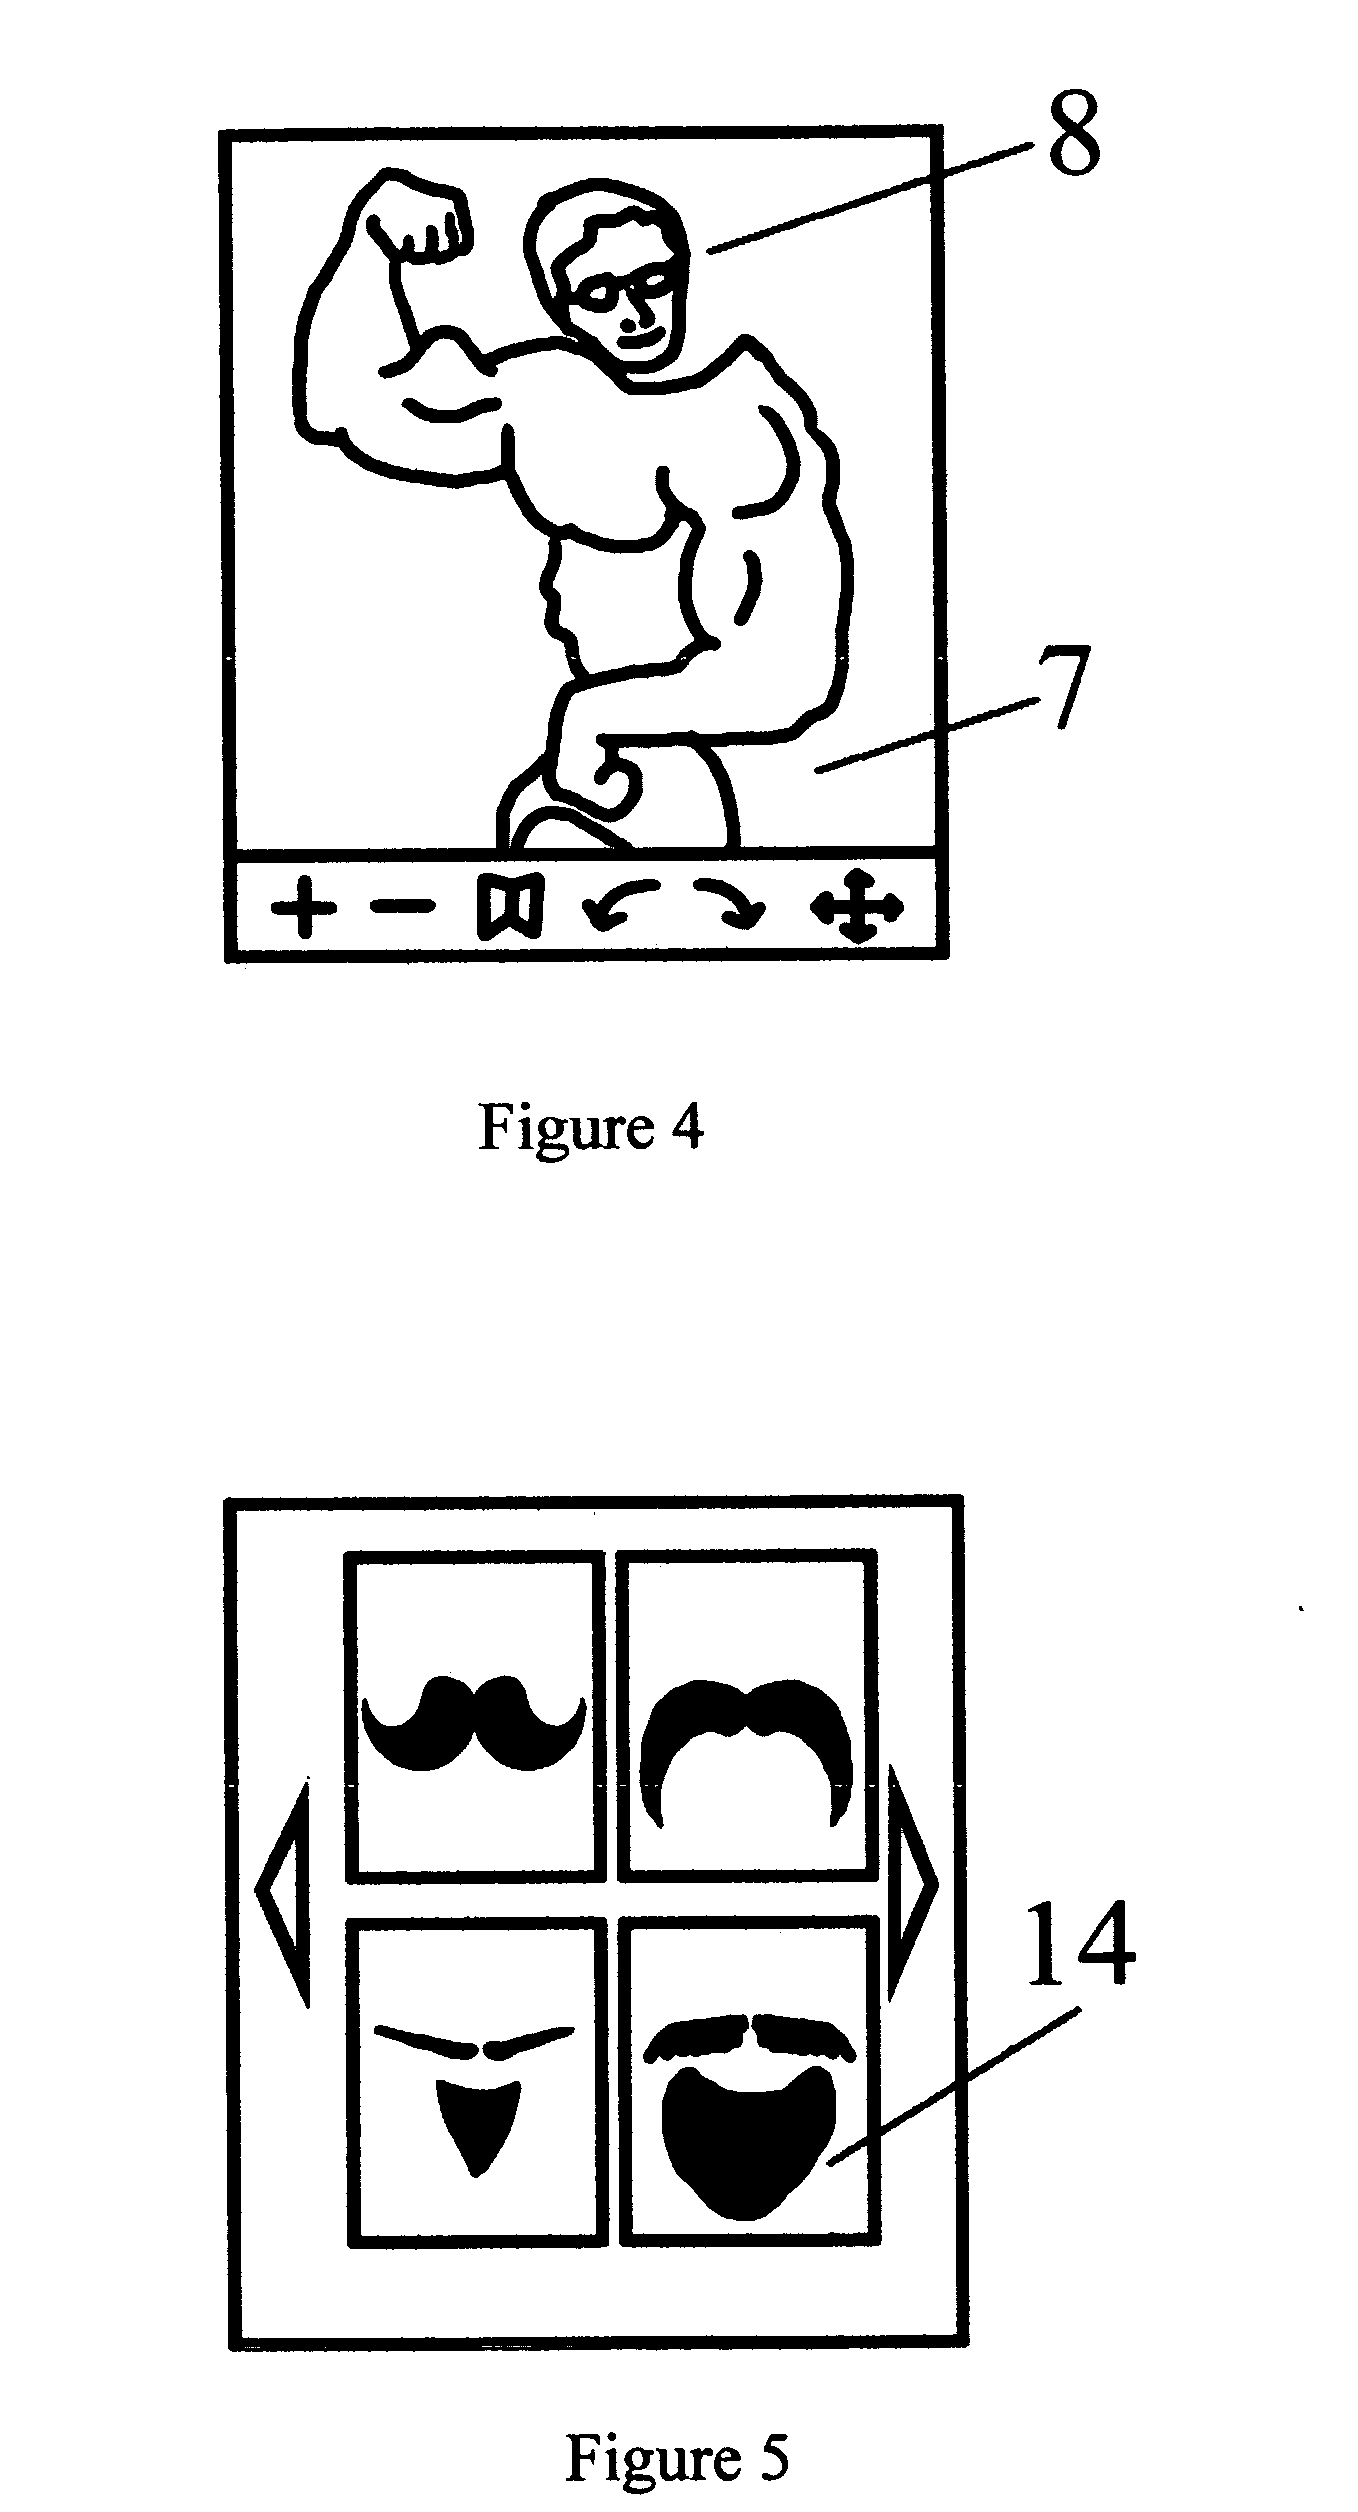 System for superimposing a face image on a body image